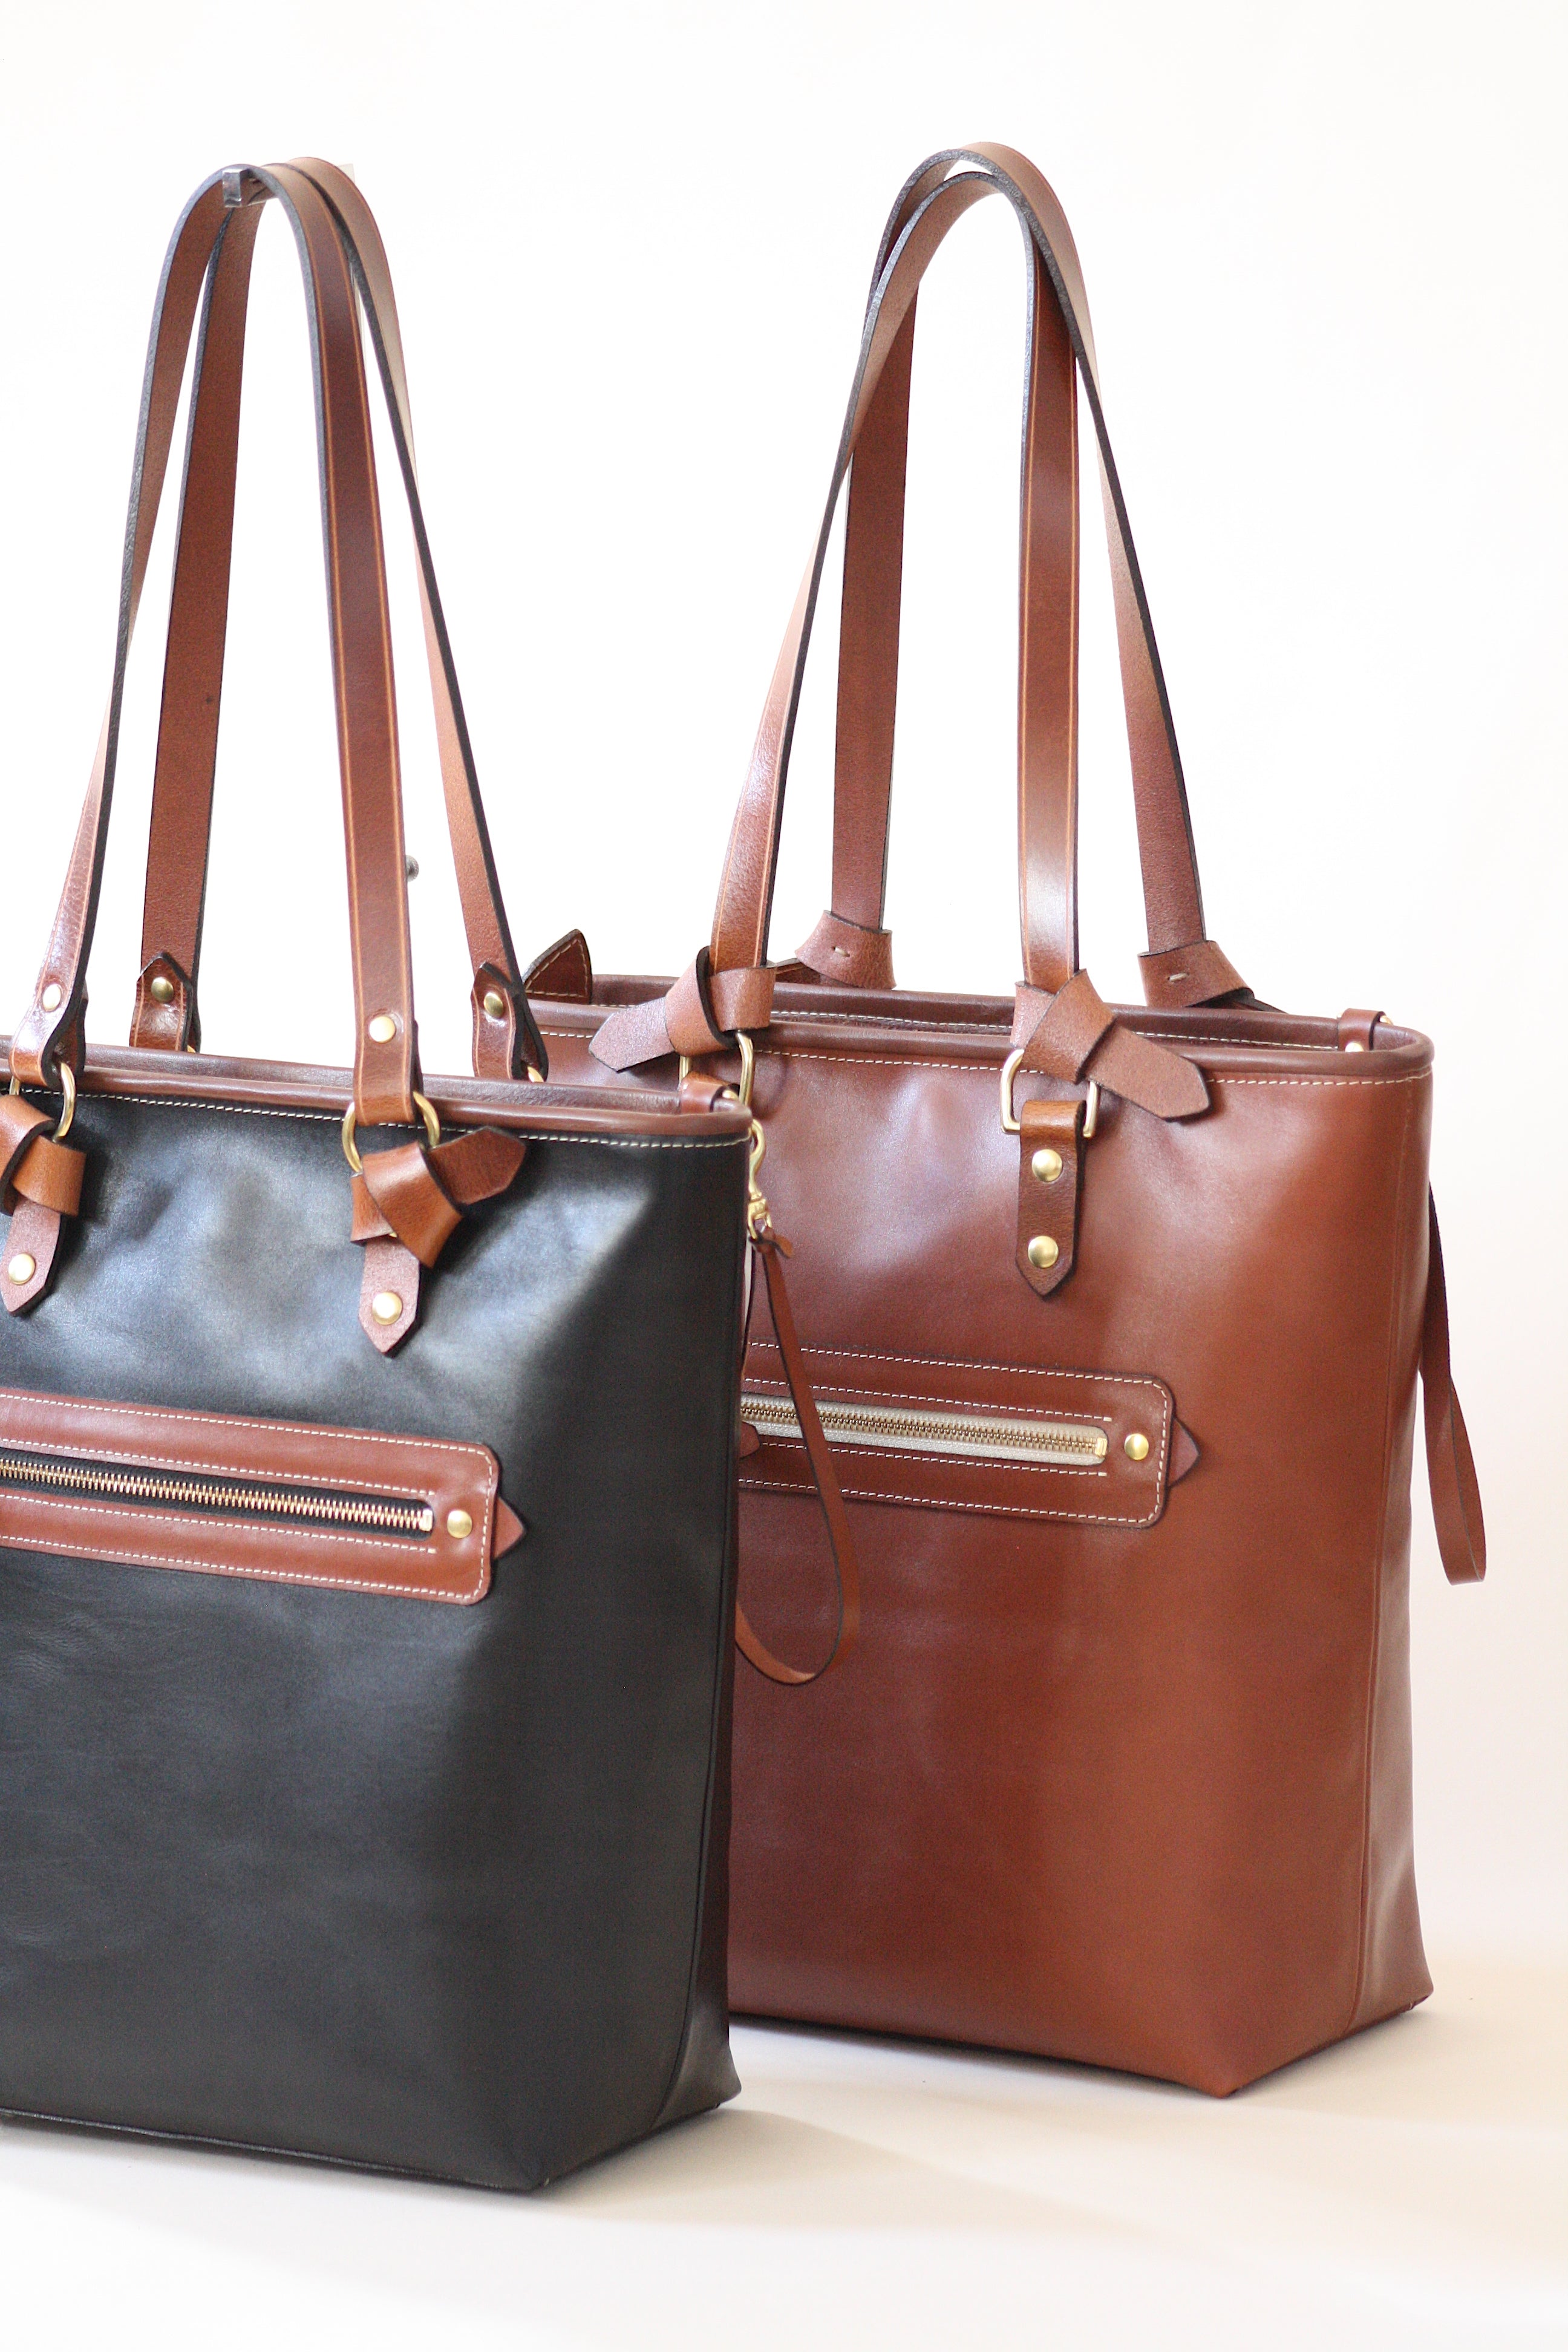 Black market bag brown leather goods handmade in Montreal Canada Luxury equestrian bags